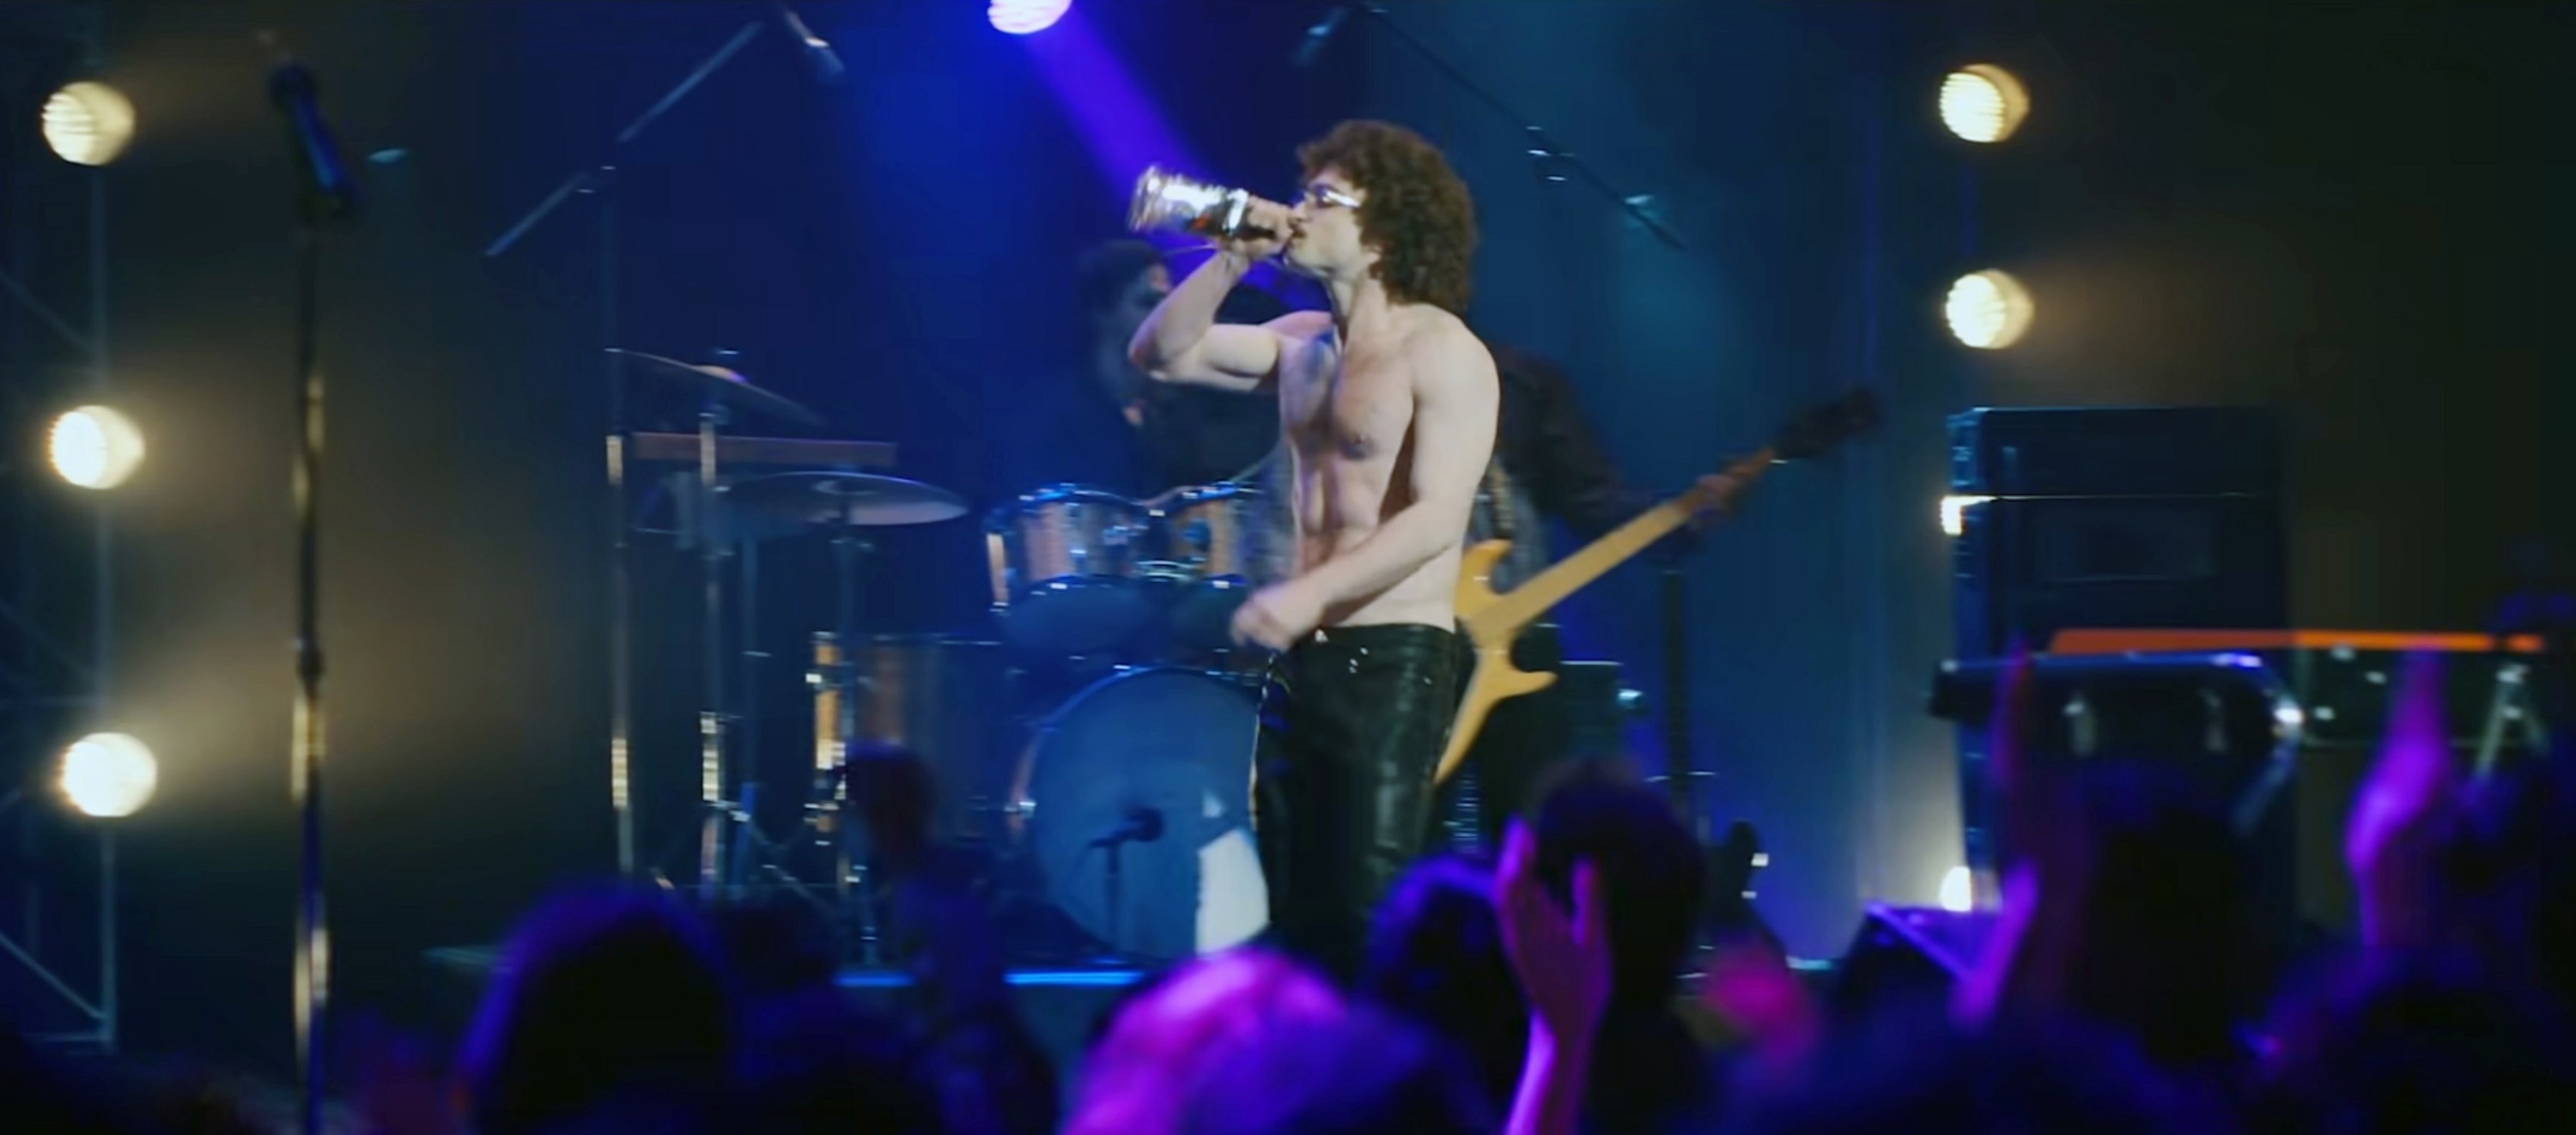 Radcliffe as Weird Al drinking onstage